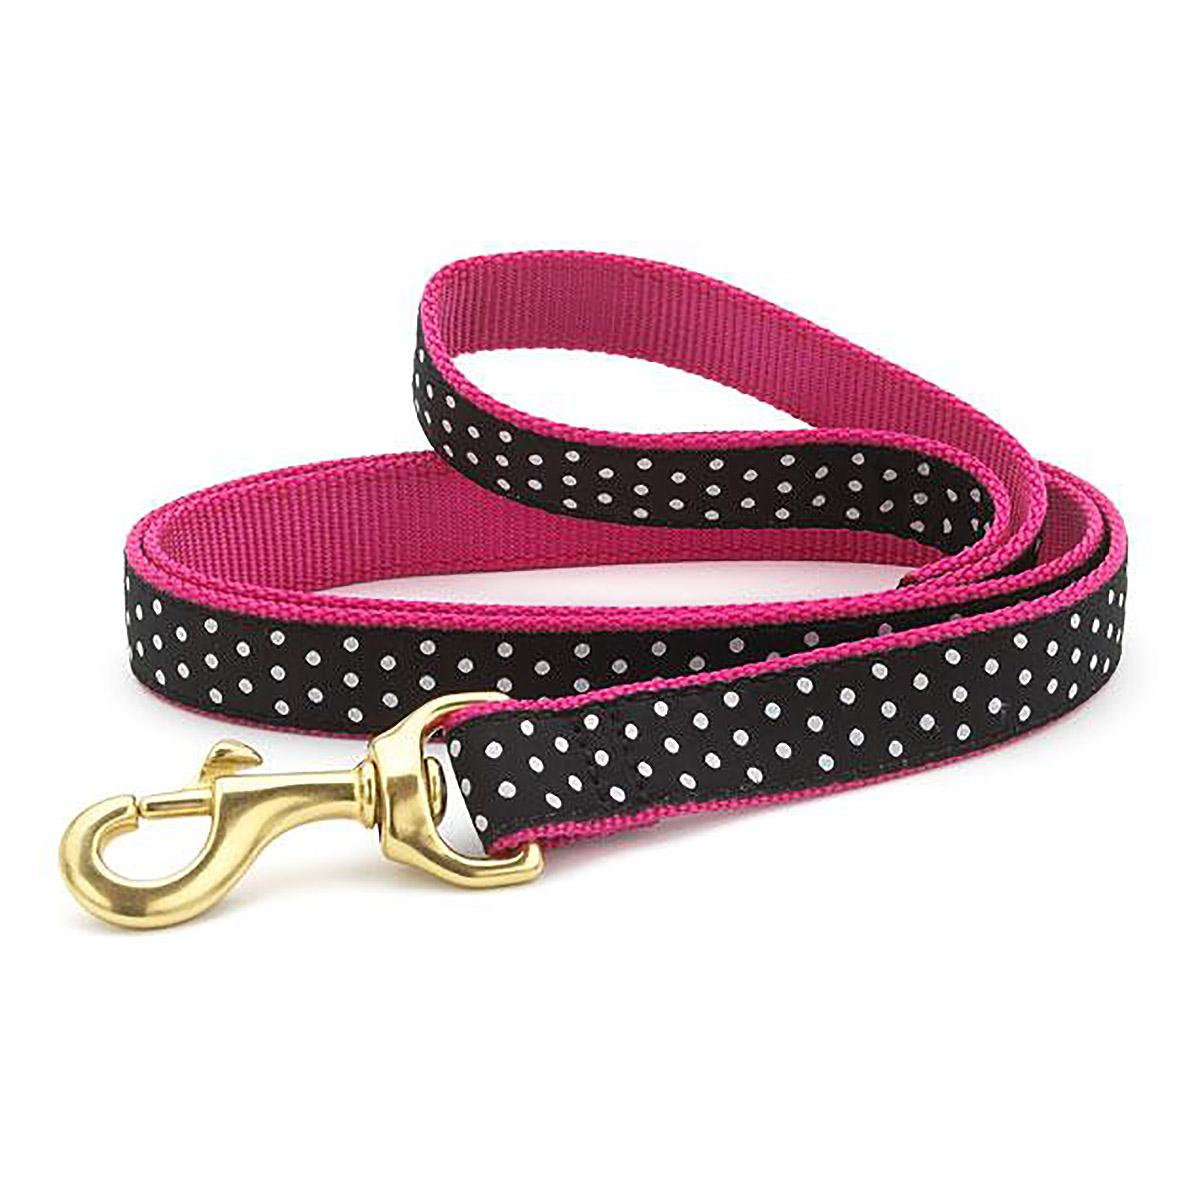 Black and White Dot Dog Leash by Up Country